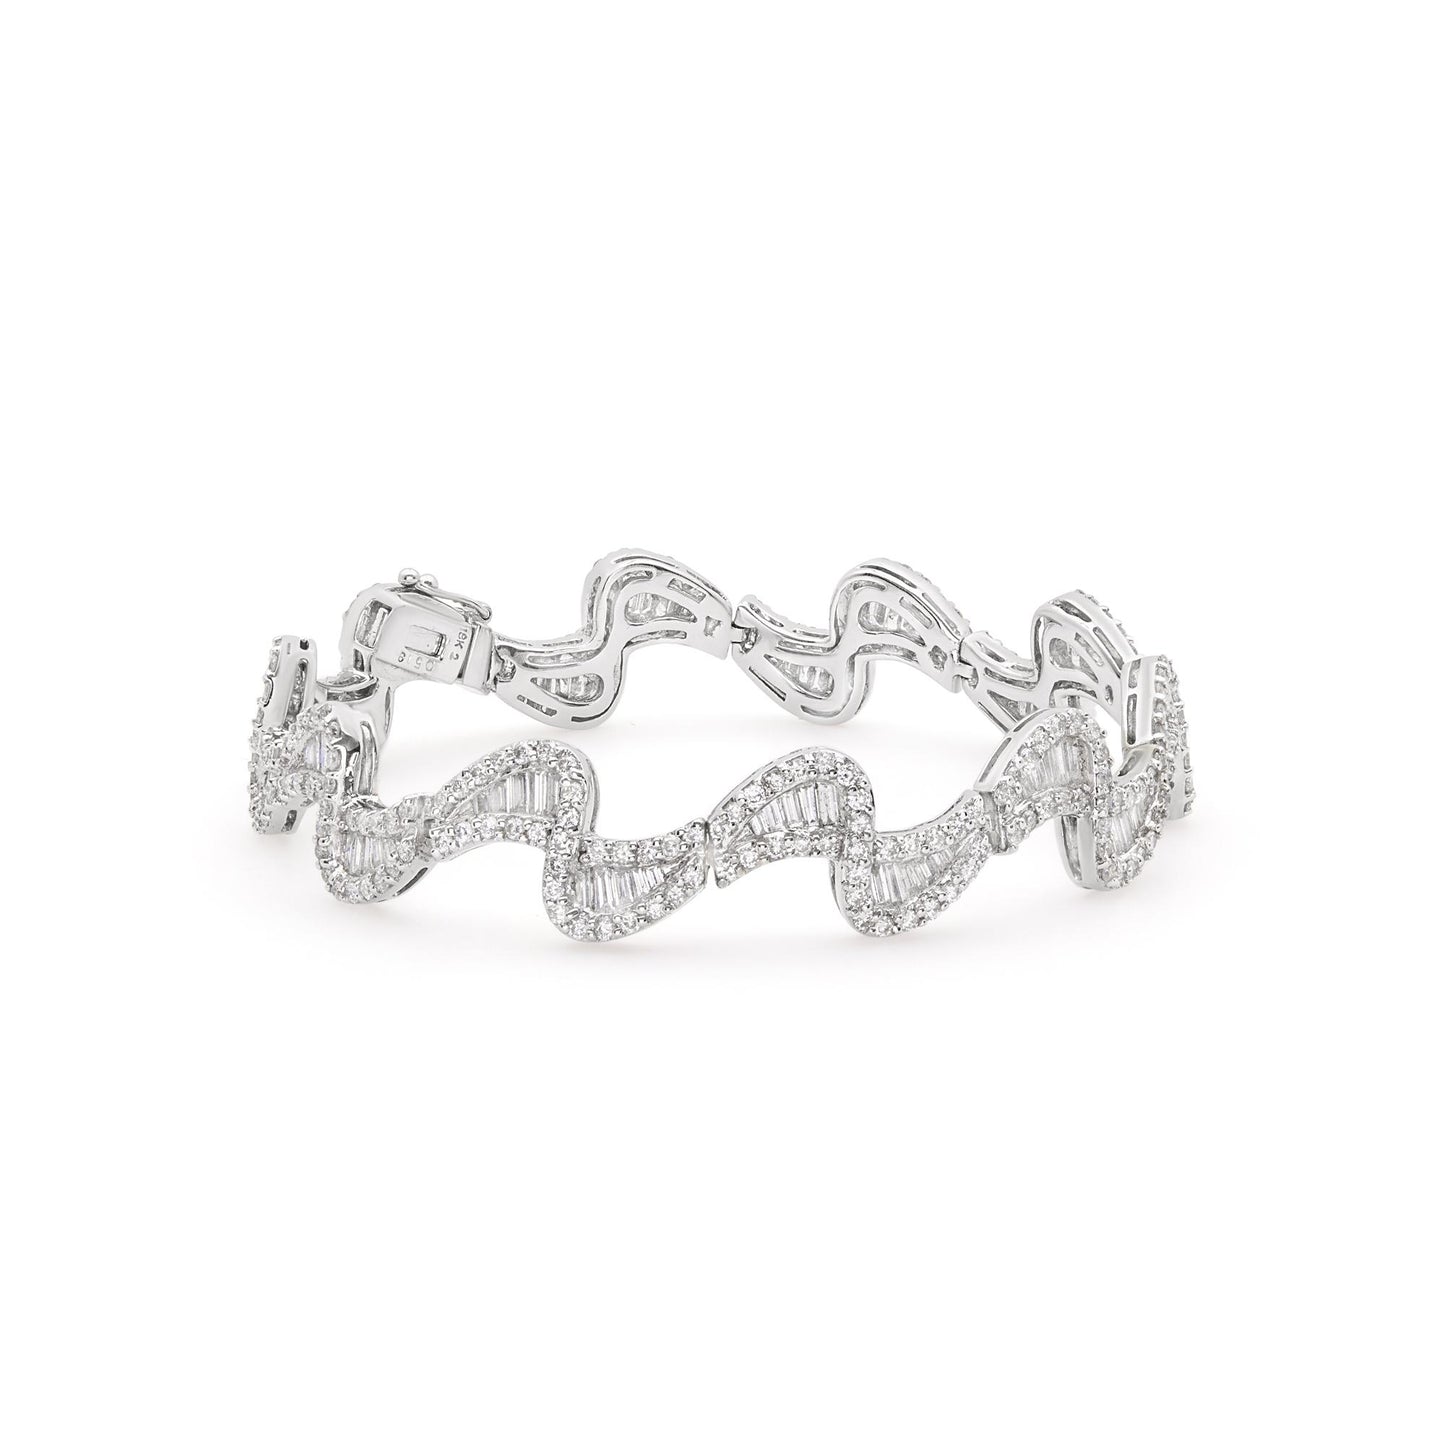 Bracelet With Baguette and Round Diamonds